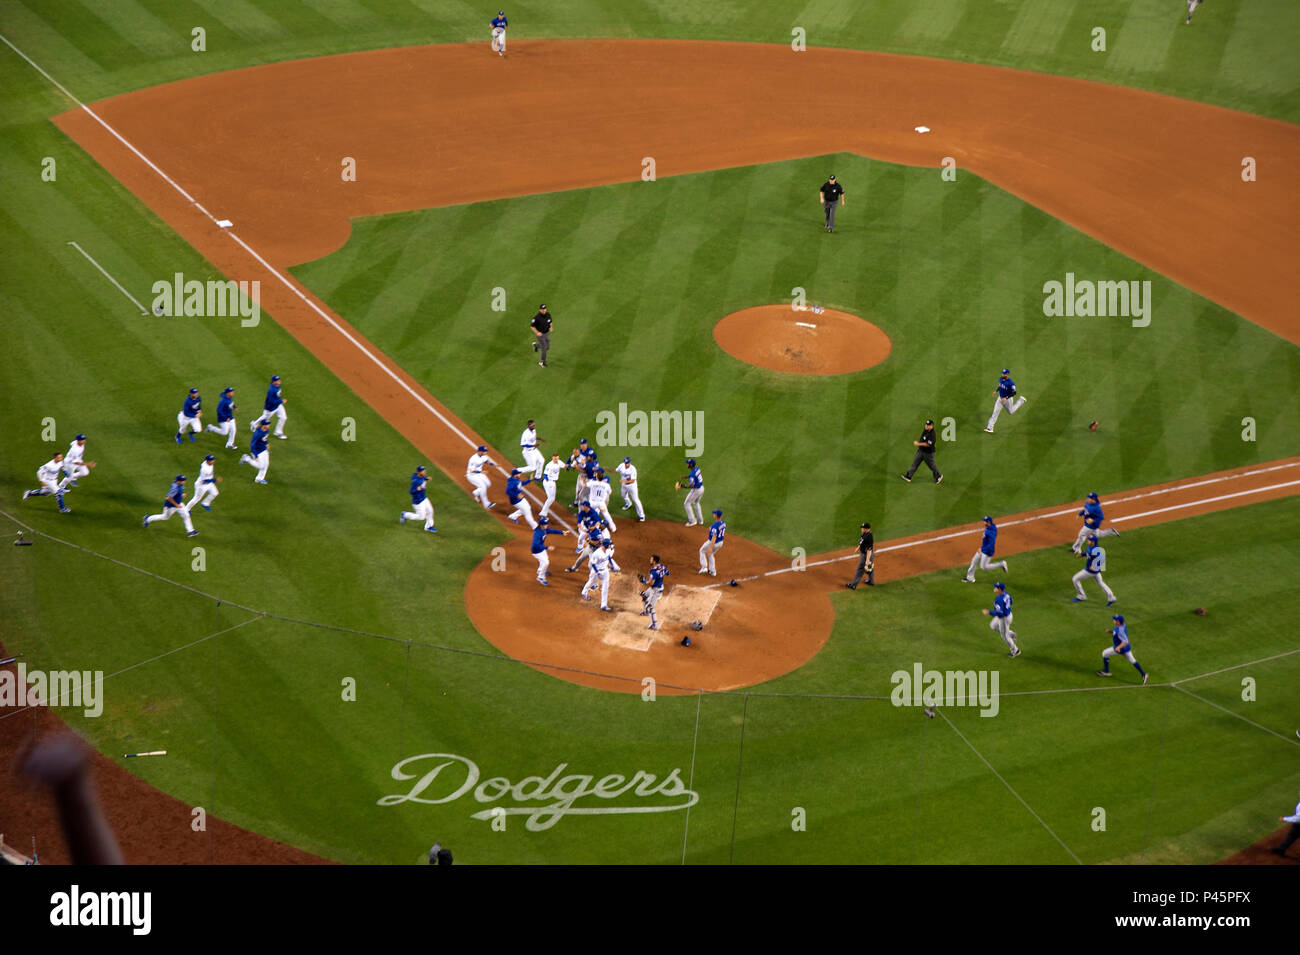 A fight erupts during Dodgers game at Dodger Stadium in Los Angeles,CA Stock Photo